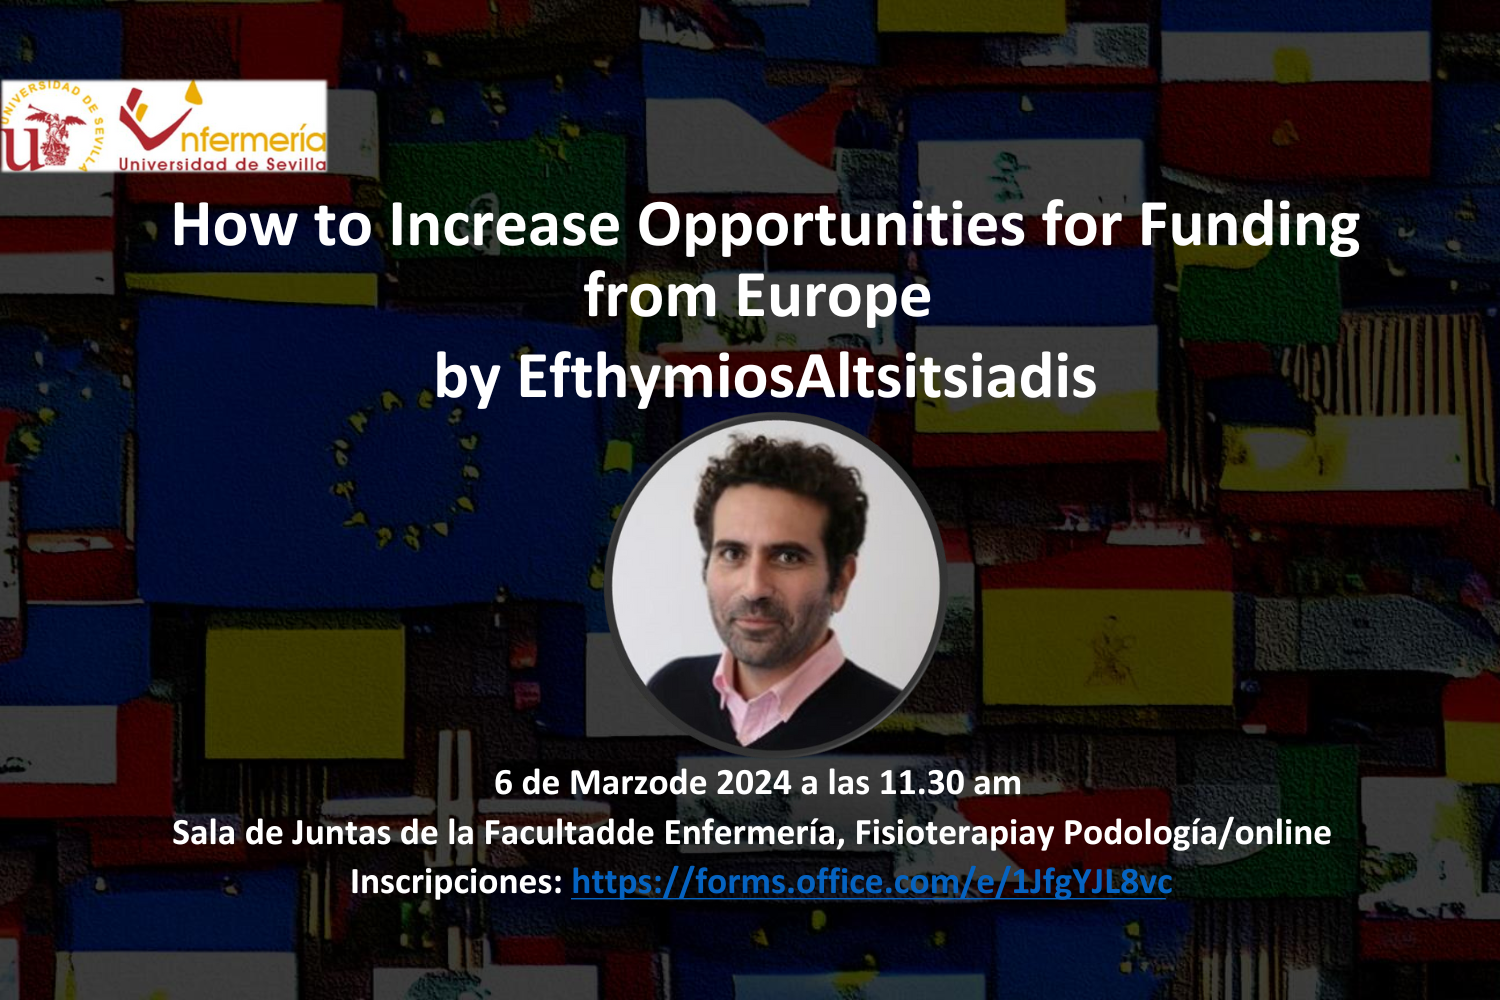 Cartel de la charla 'How to Increase Opportunities for Funding from Europe'